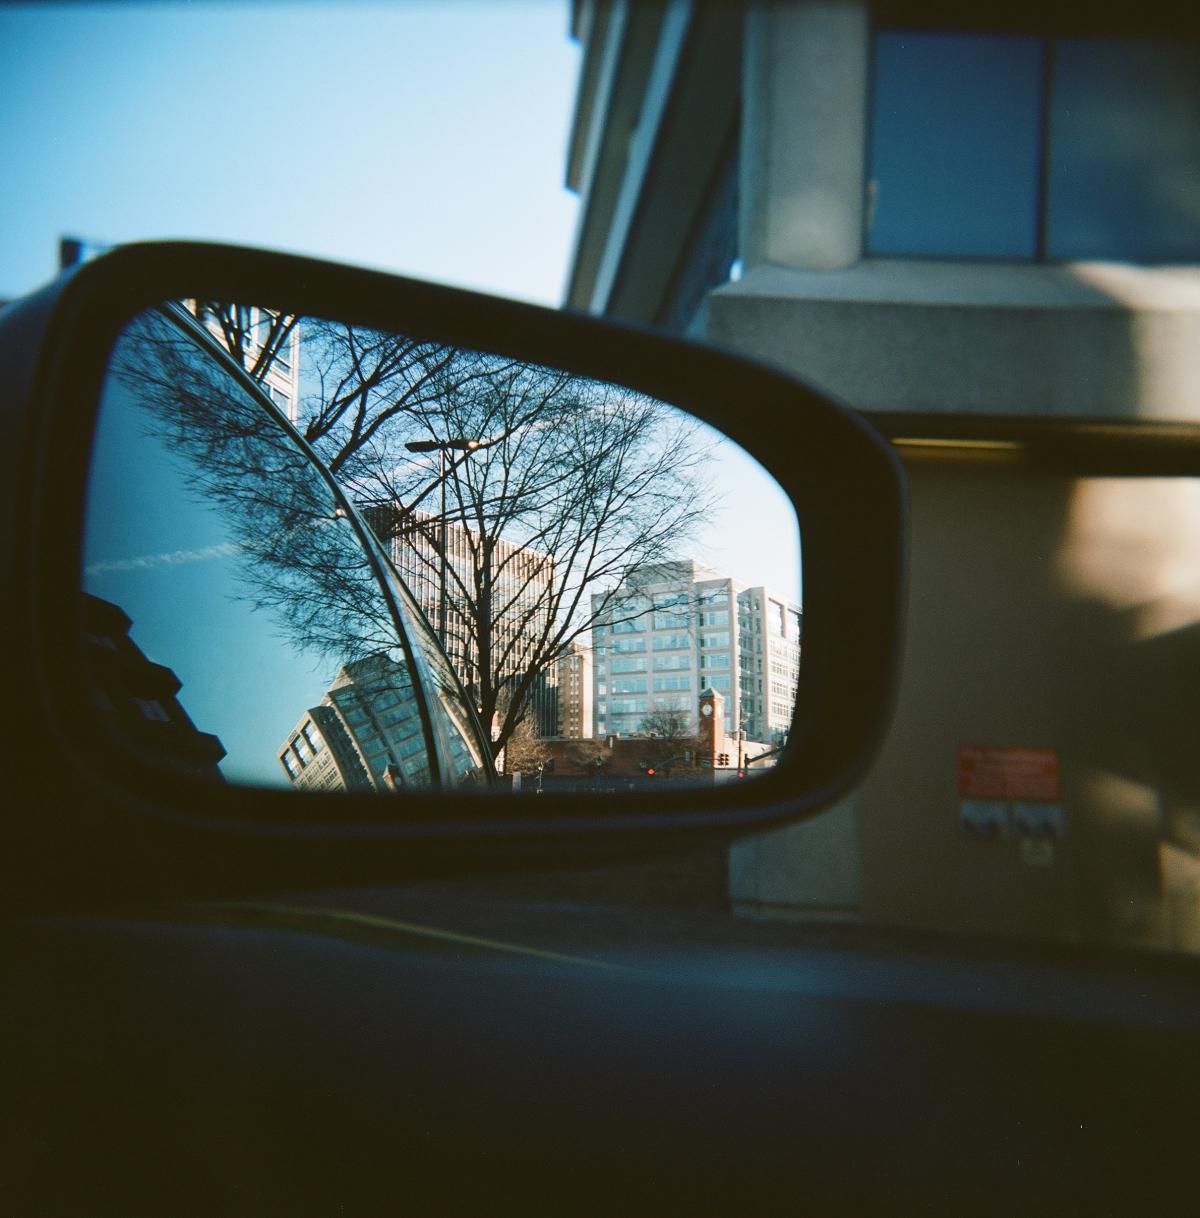 Image of a car's rearview mirror reflecting the city of DC